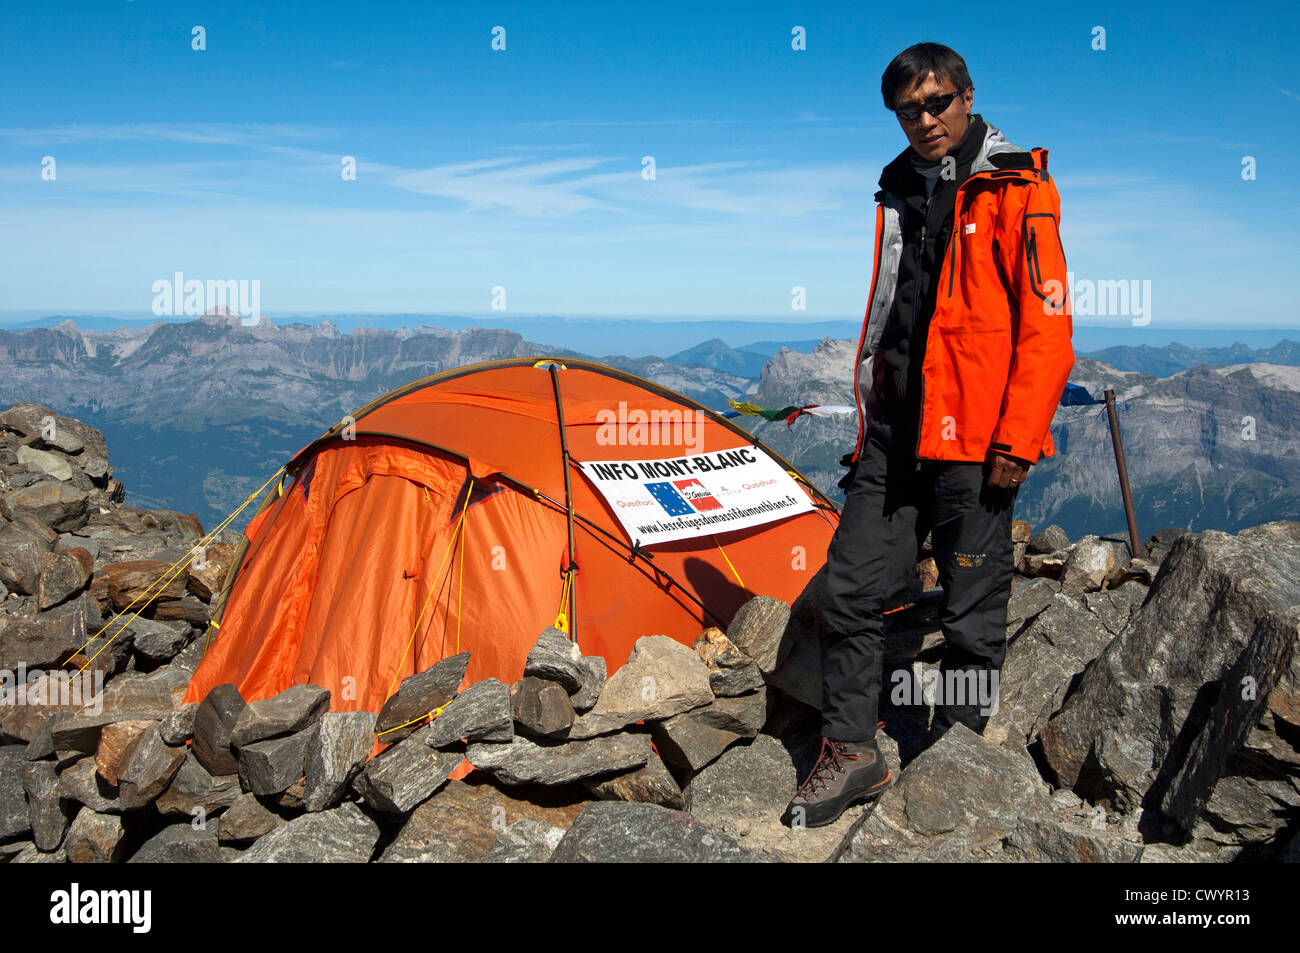 Young man from Nepal as mountain ranger at an information tent for climbers of the Mont Blanc peak, Chamonix, France Stock Photo